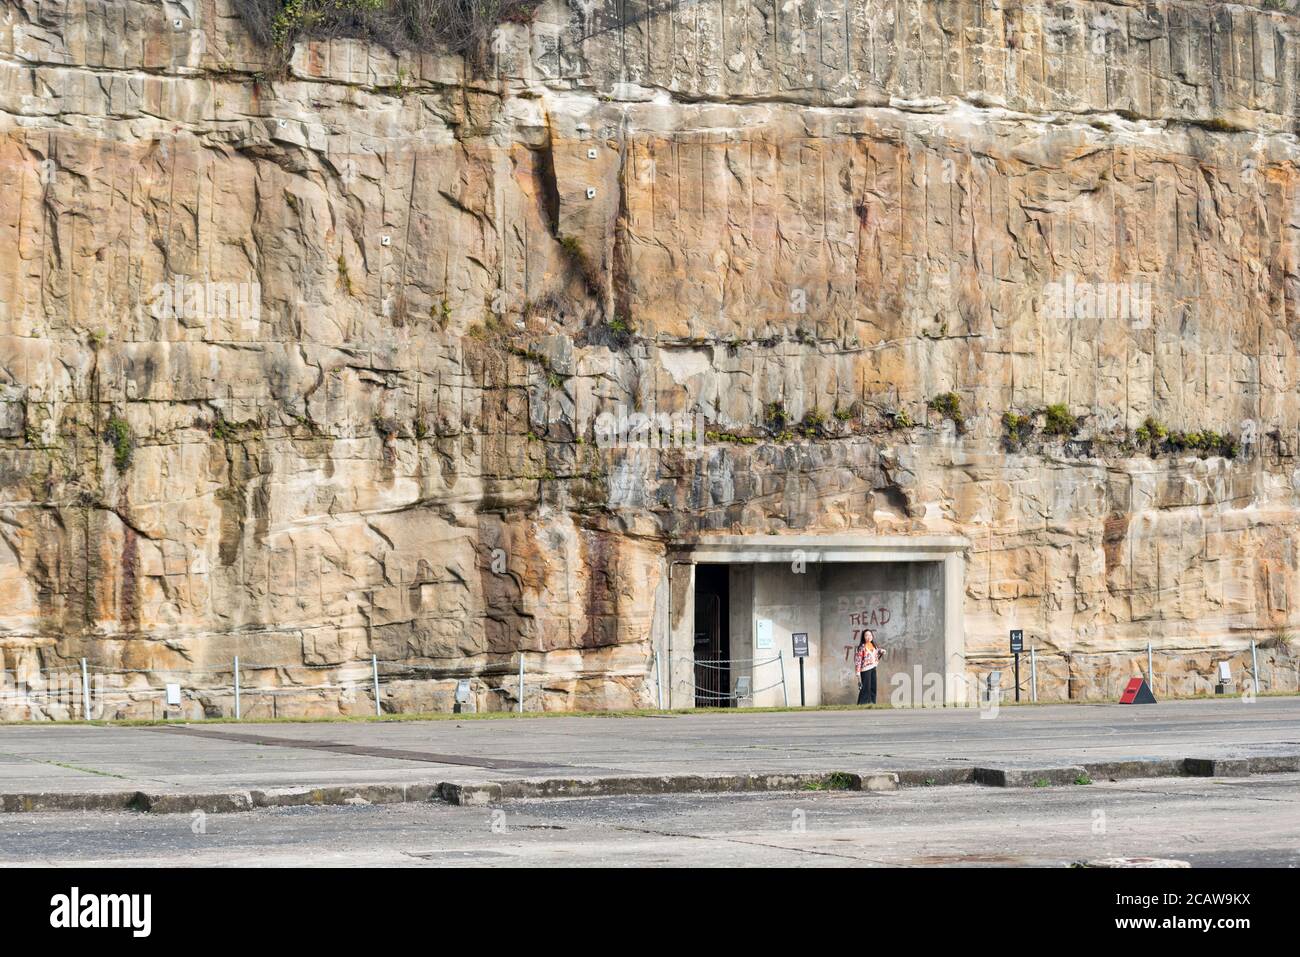 One of two long tunnels through the giant sandstone rock face, that connect to the other side of Cockatoo Island dockyard in Sydney Harbour, Australia Stock Photo